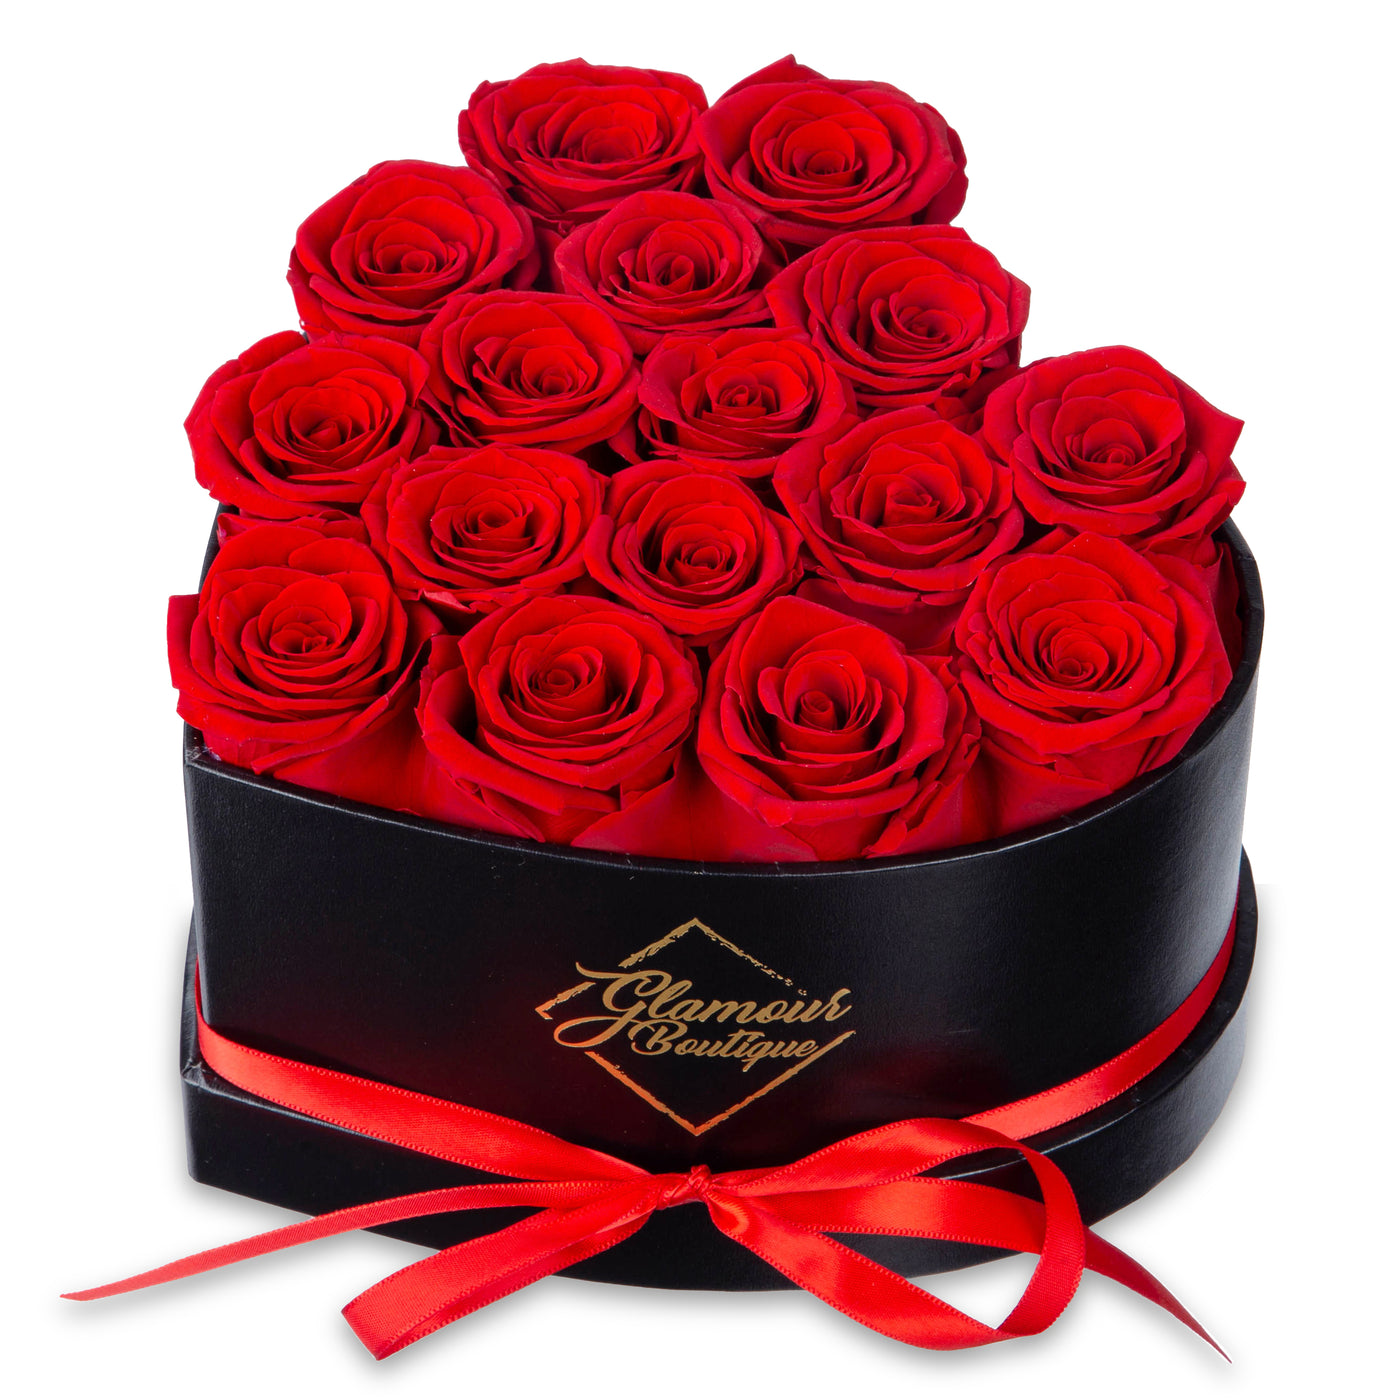 16-Piece Forever Flowers Heart Shape Box - Real Preserved Roses Handmade - Red